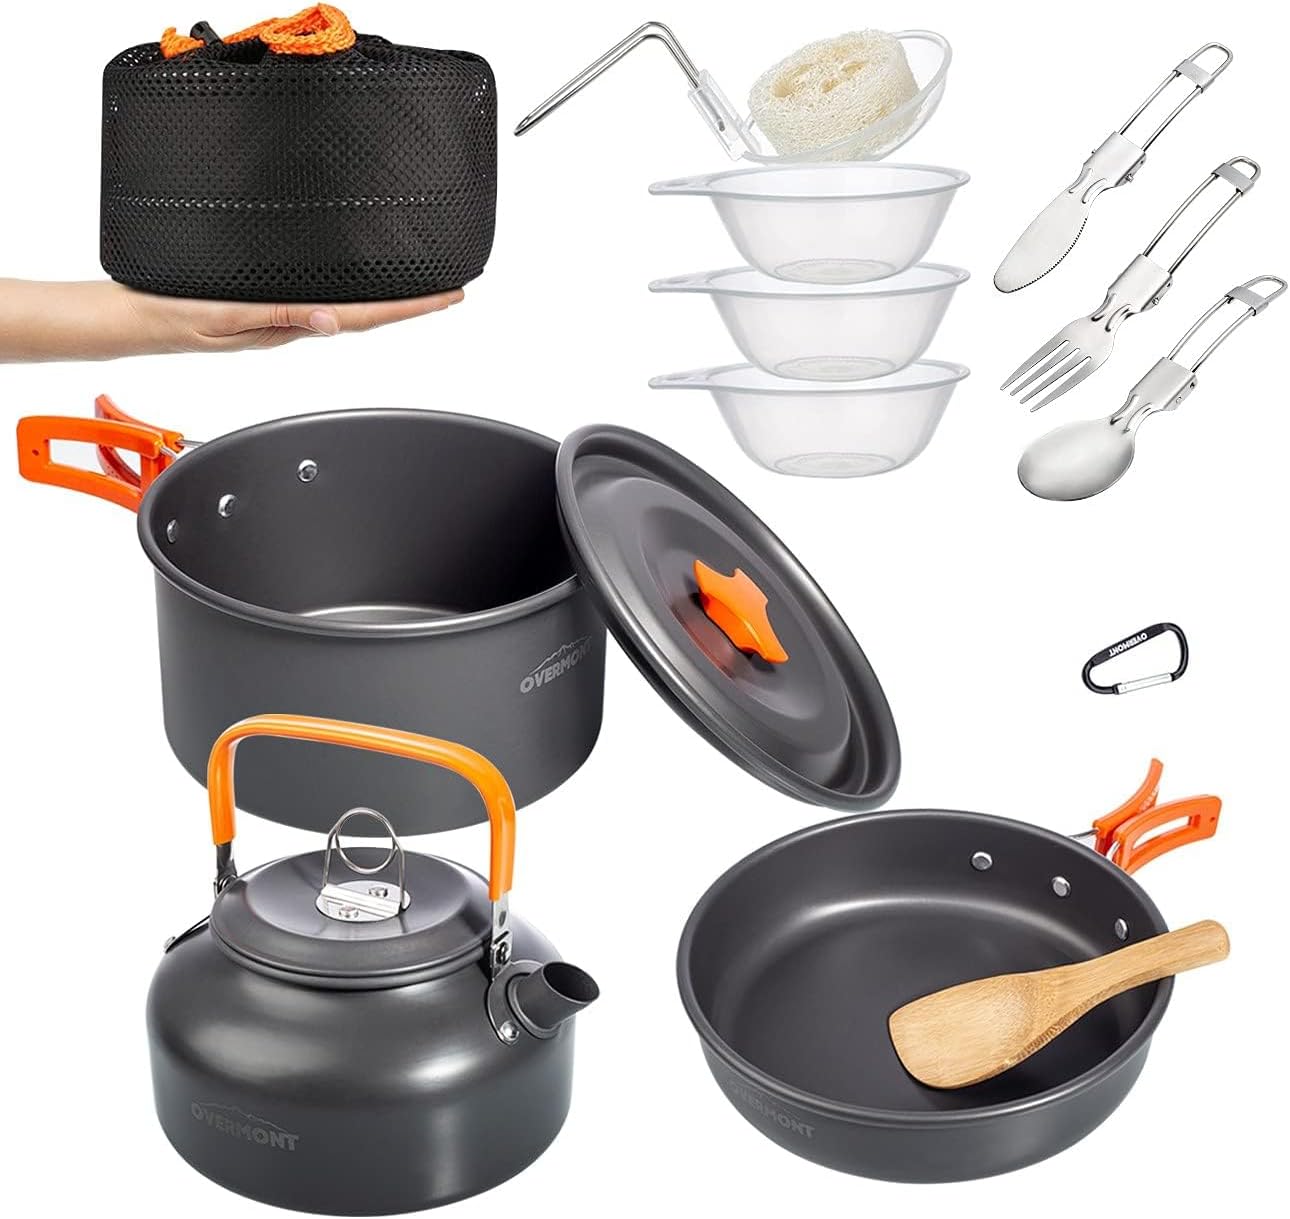 14 PCS Camping Cookware Outdoor Kitchen Set. Phil and Gazelle.